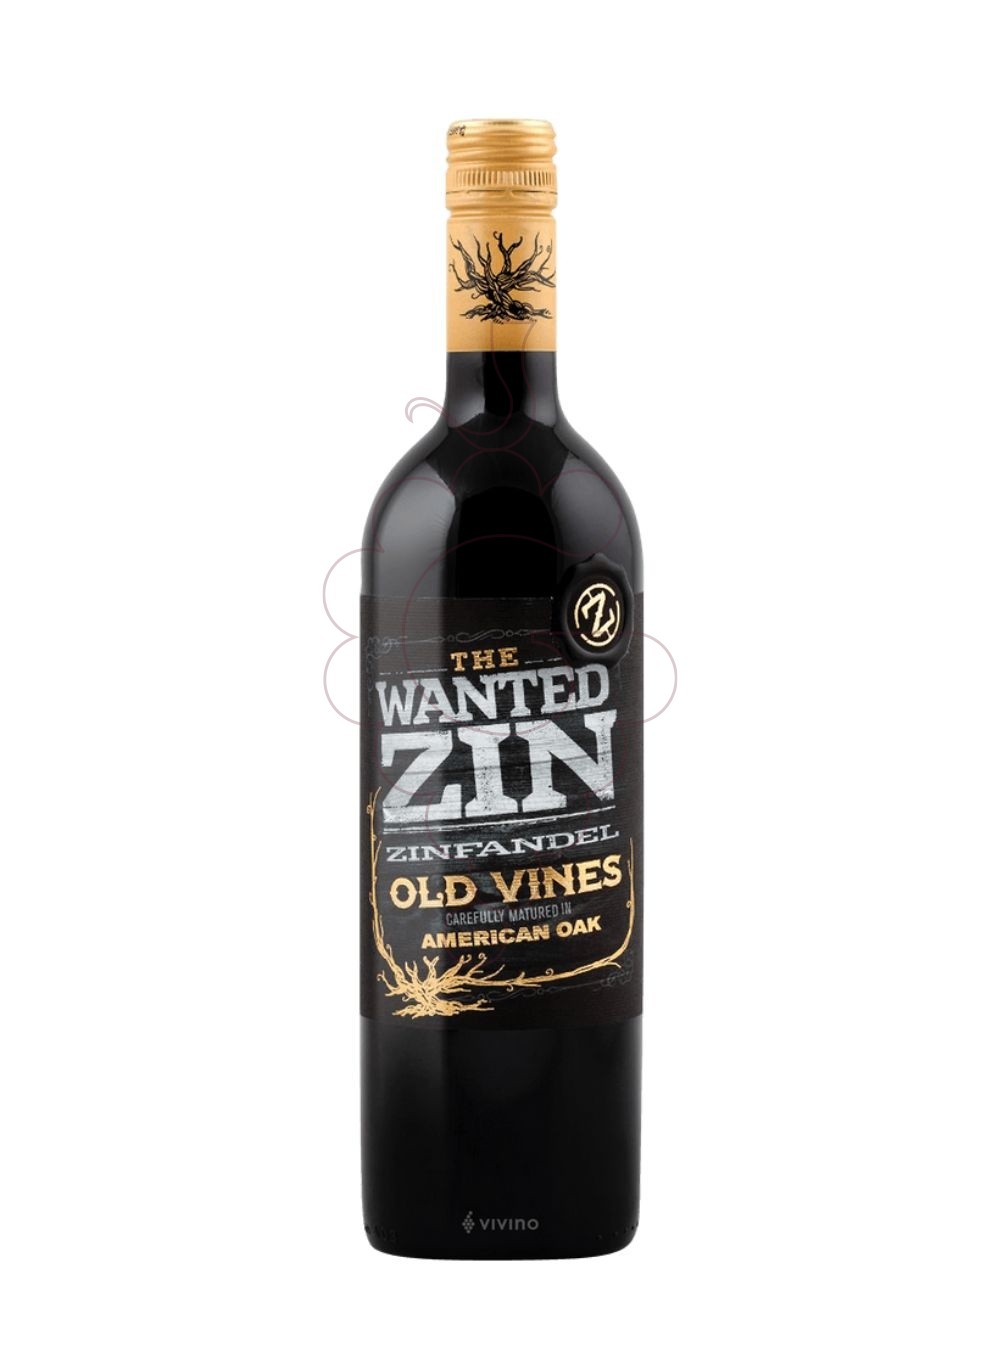 Foto The wanted zin negre 75 cl vino tinto